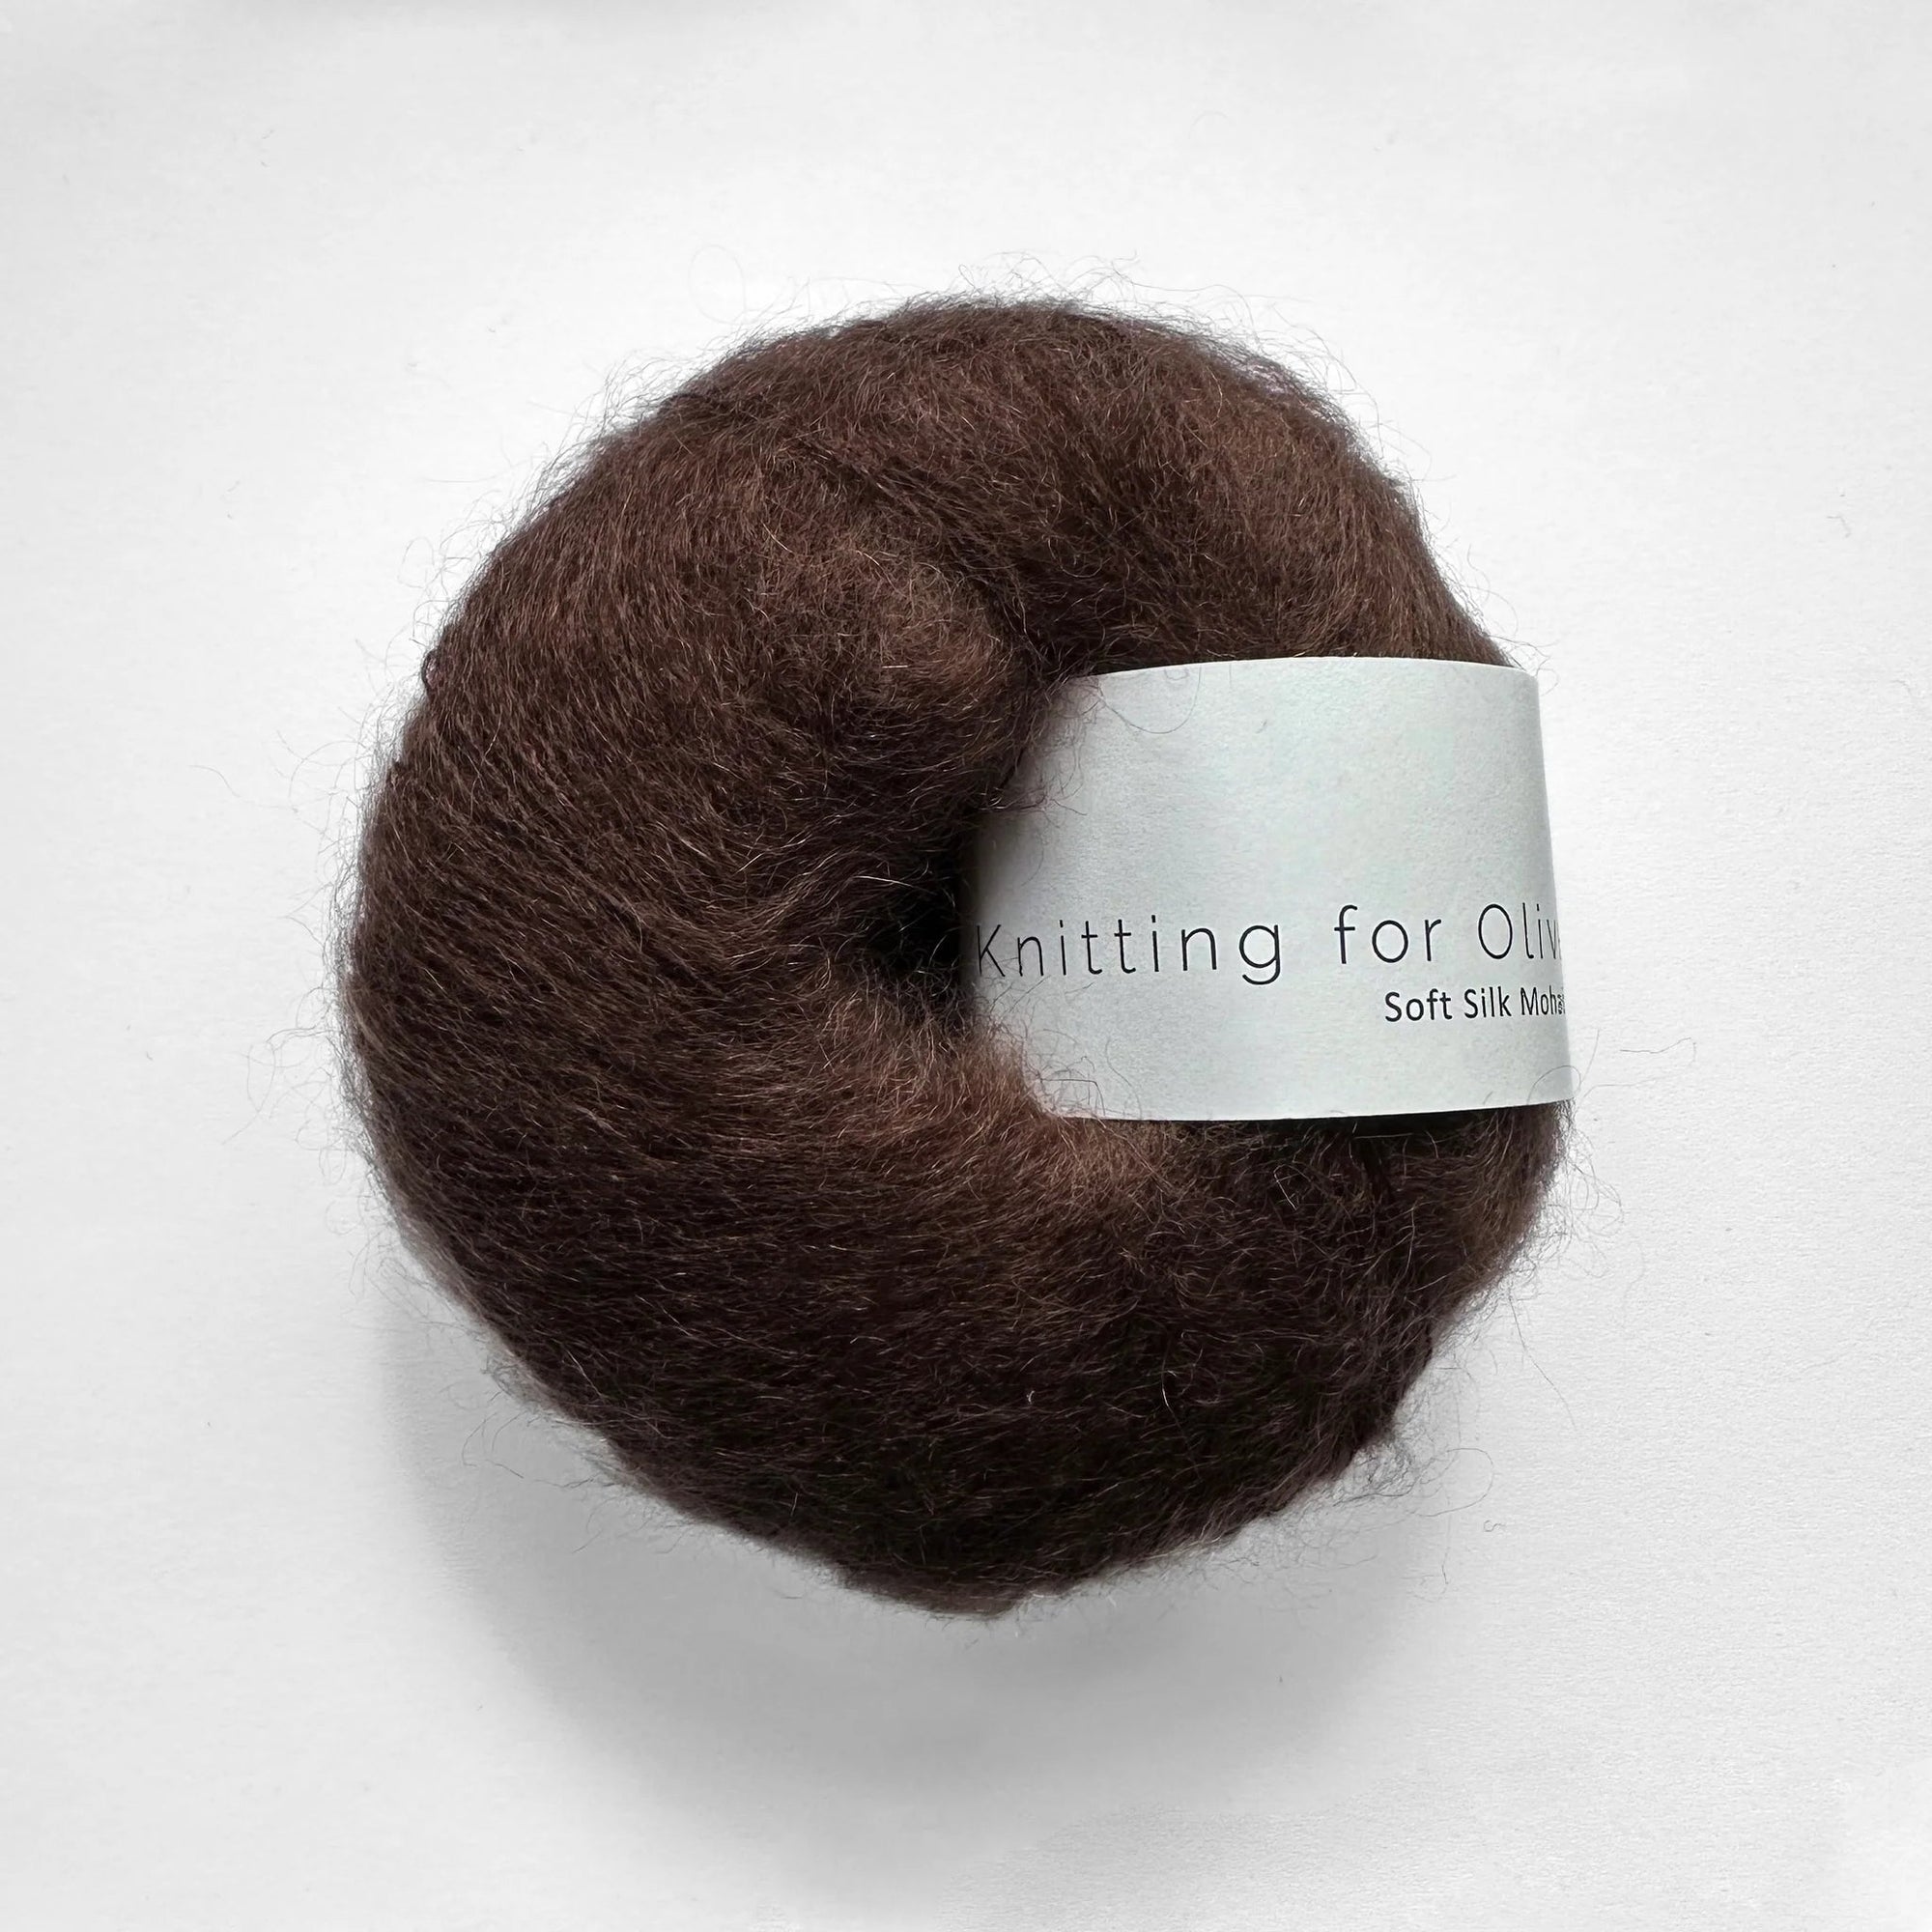 Knitting for Olive Soft Silk Mohair - Knitting for Olive - Chocolate - The Little Yarn Store